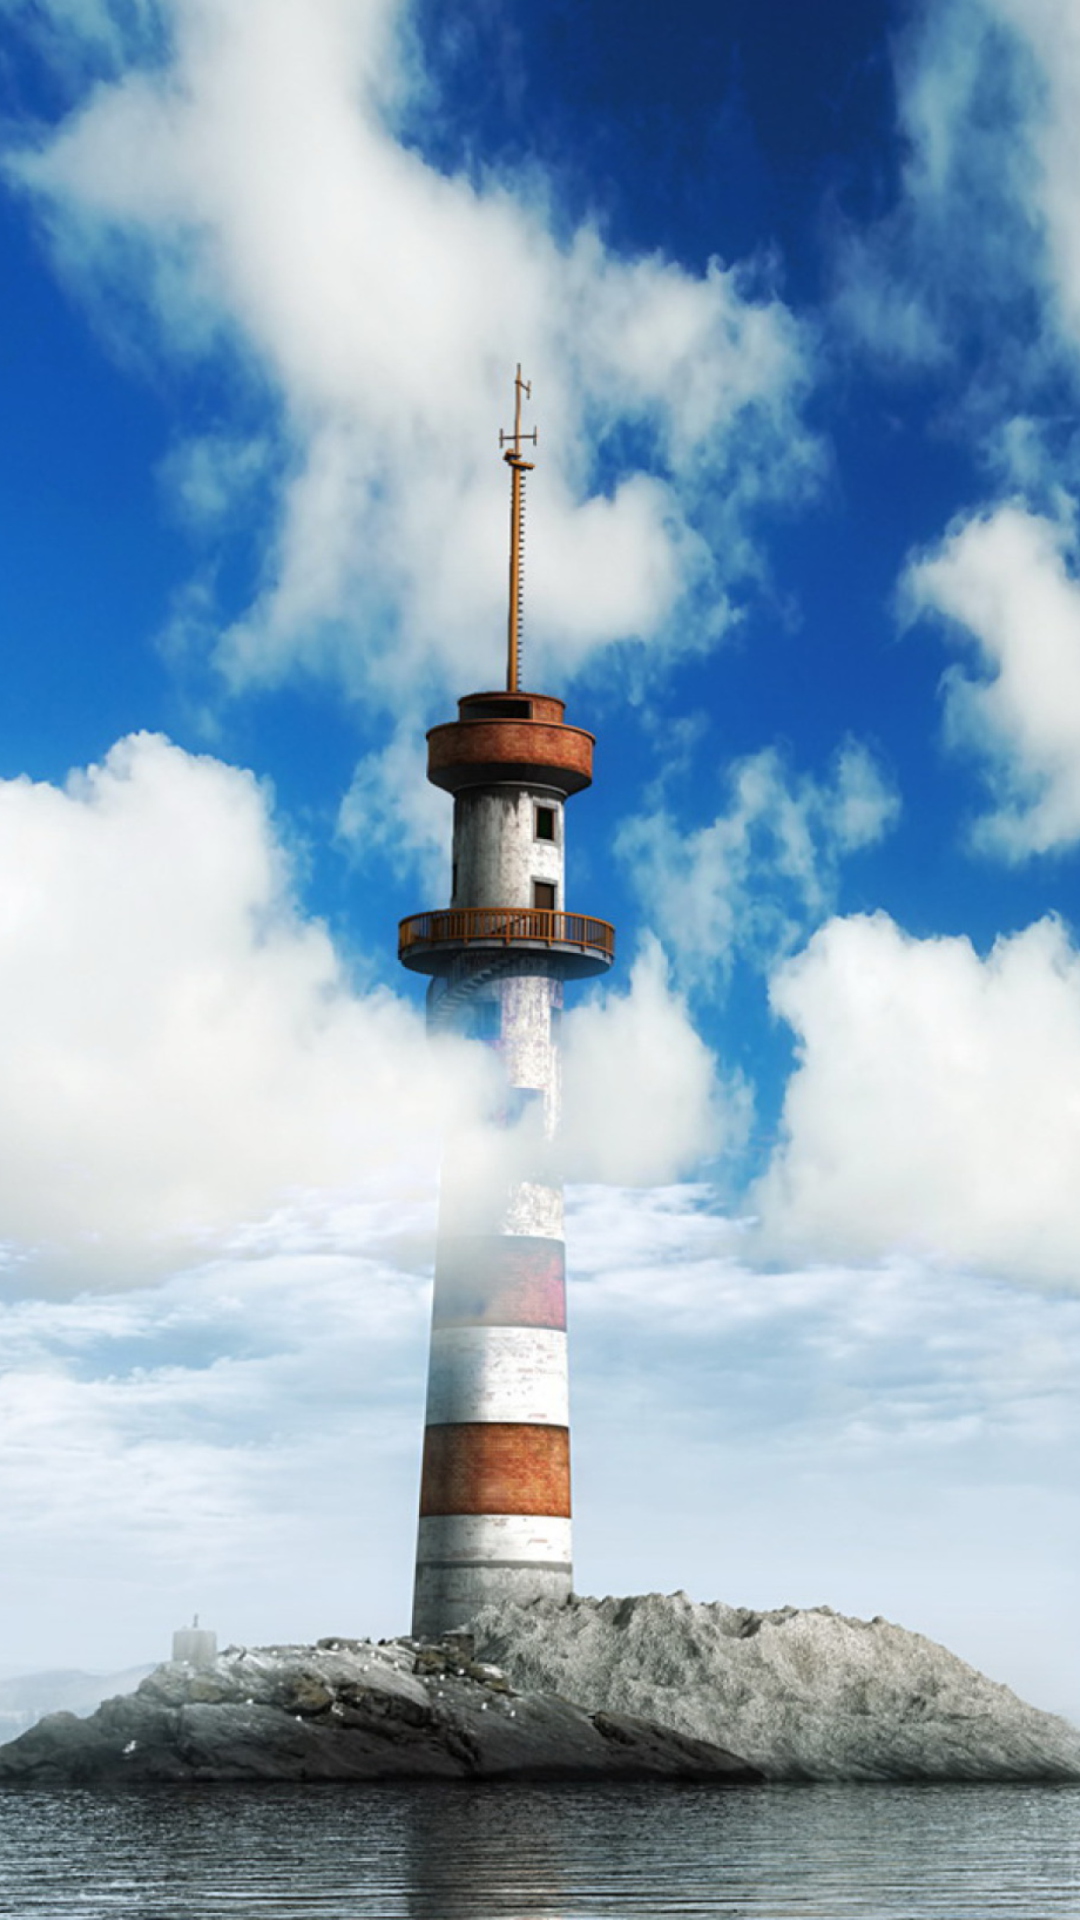 Lighthouse In Clouds wallpaper 1080x1920